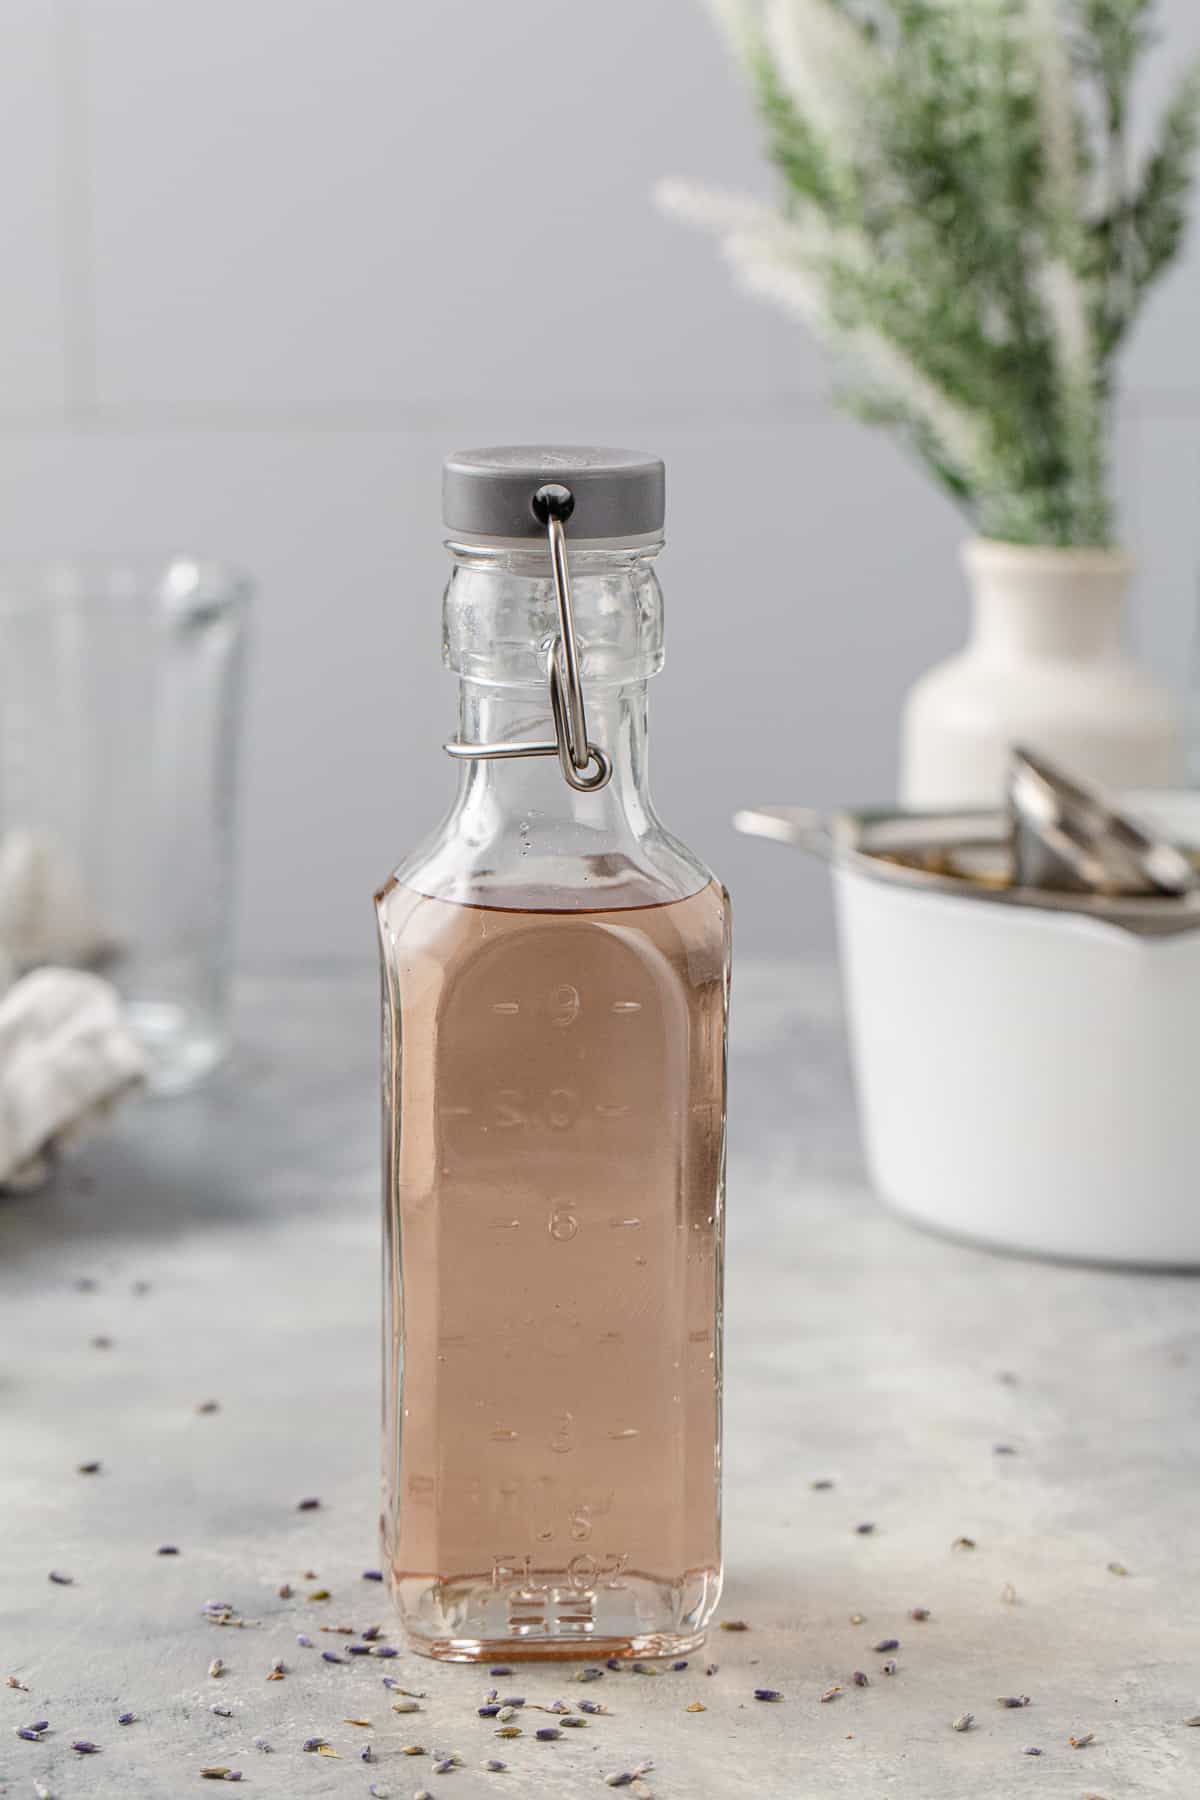 Bottle of lavender syrup on a gray countertop. In the background is a white pot and other tools to make the syrup, along with a vase of greenery.